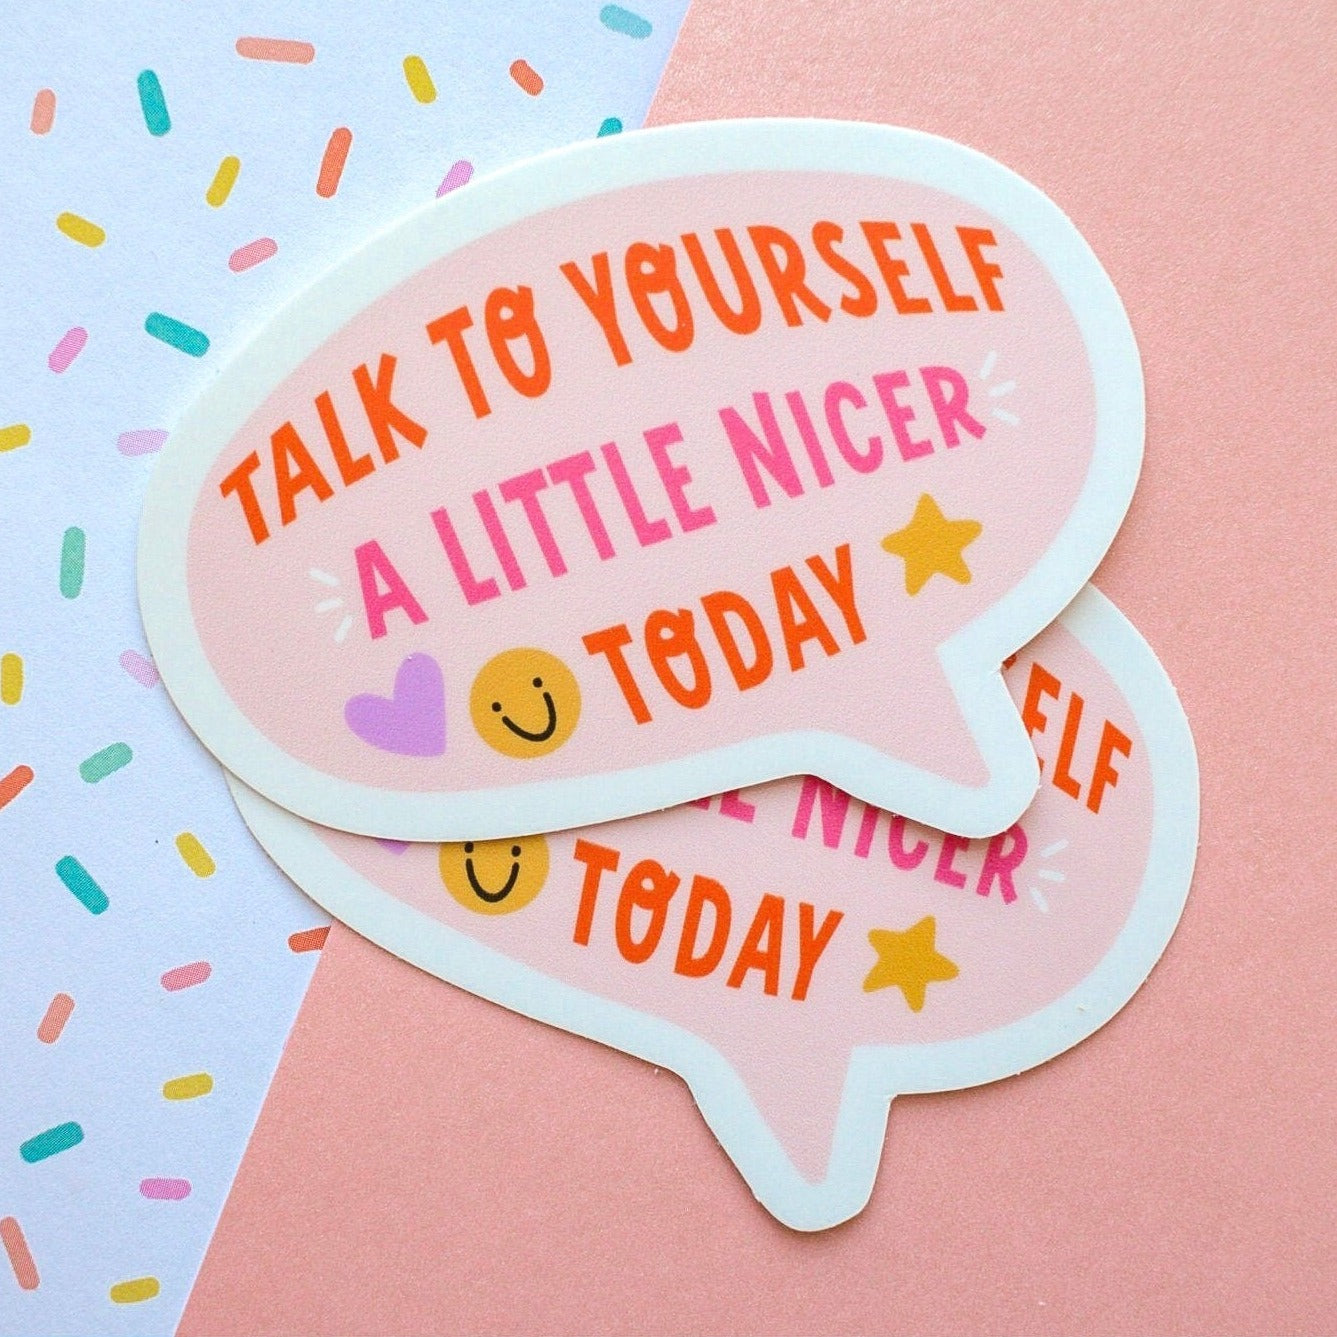 Talk to Yourself a Little Nicer Sticker